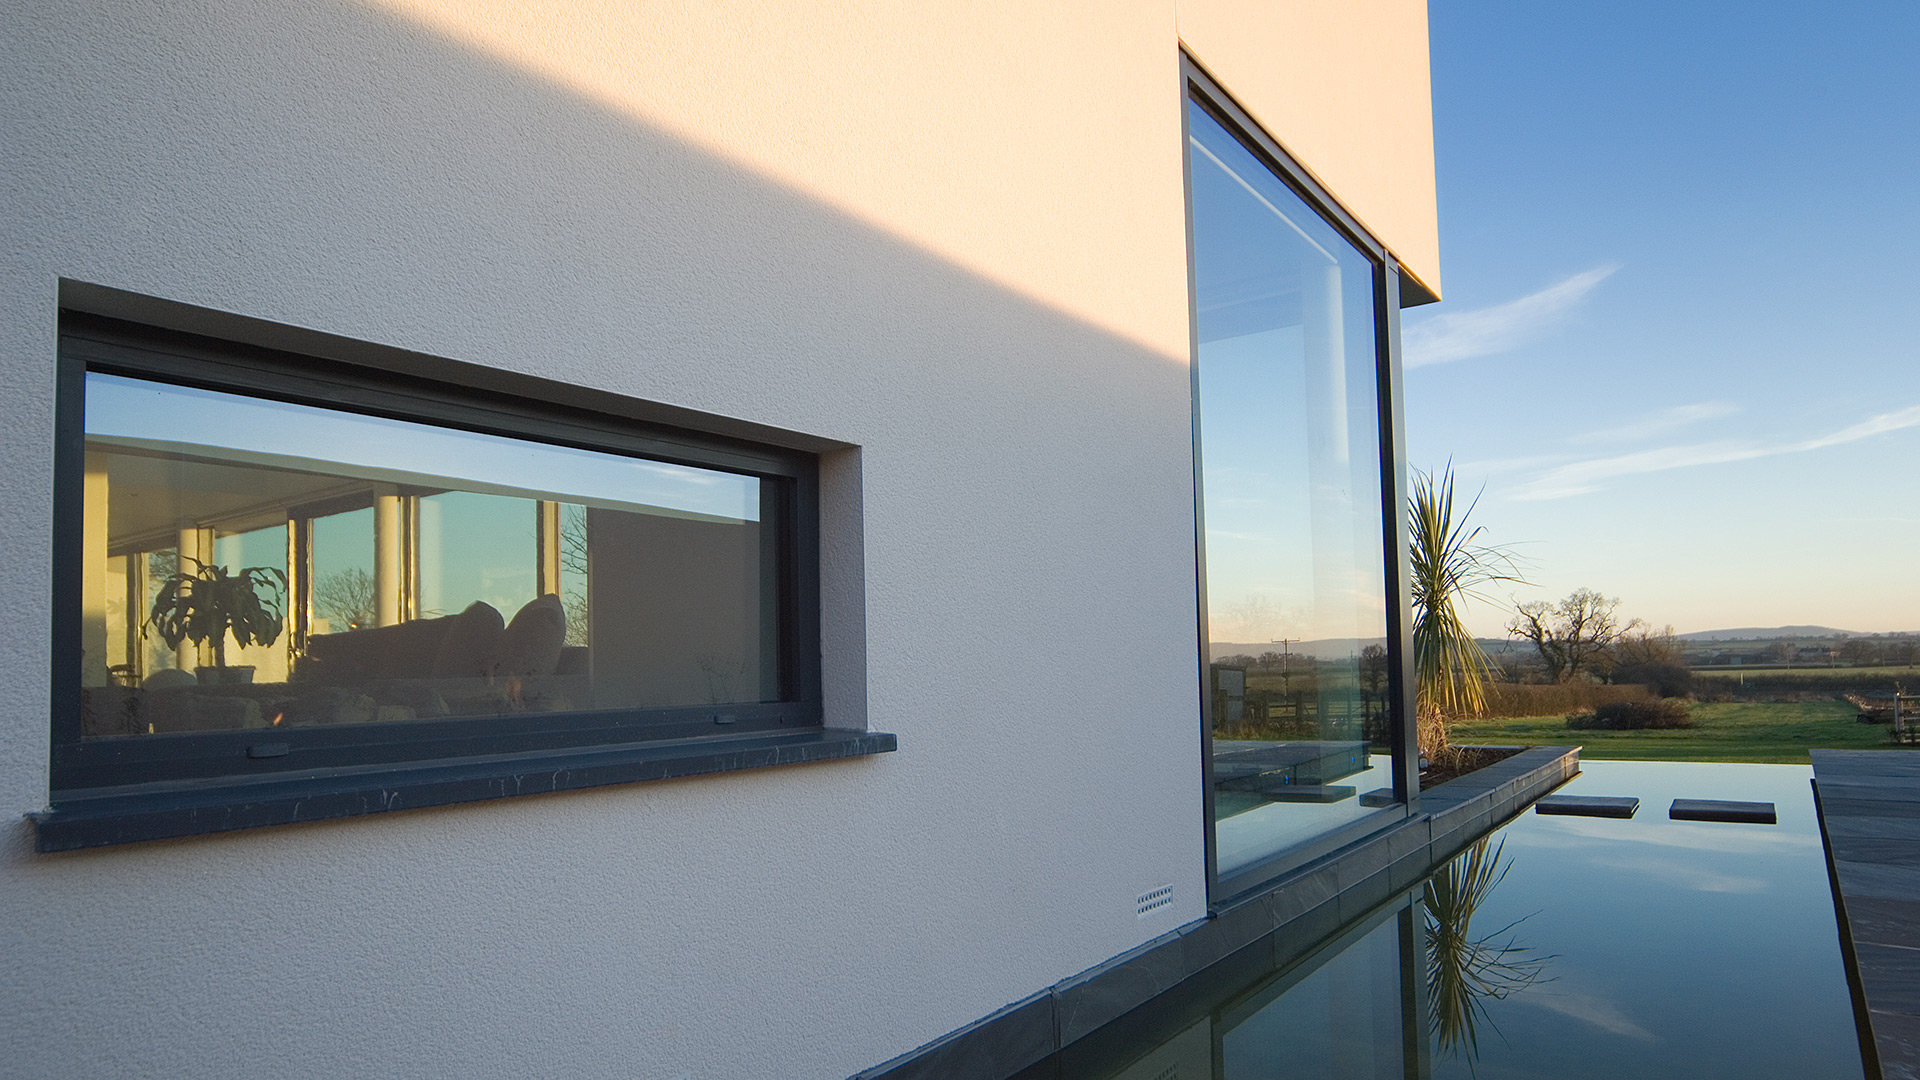 close up photo of modern house with moat around and stunning countryside views